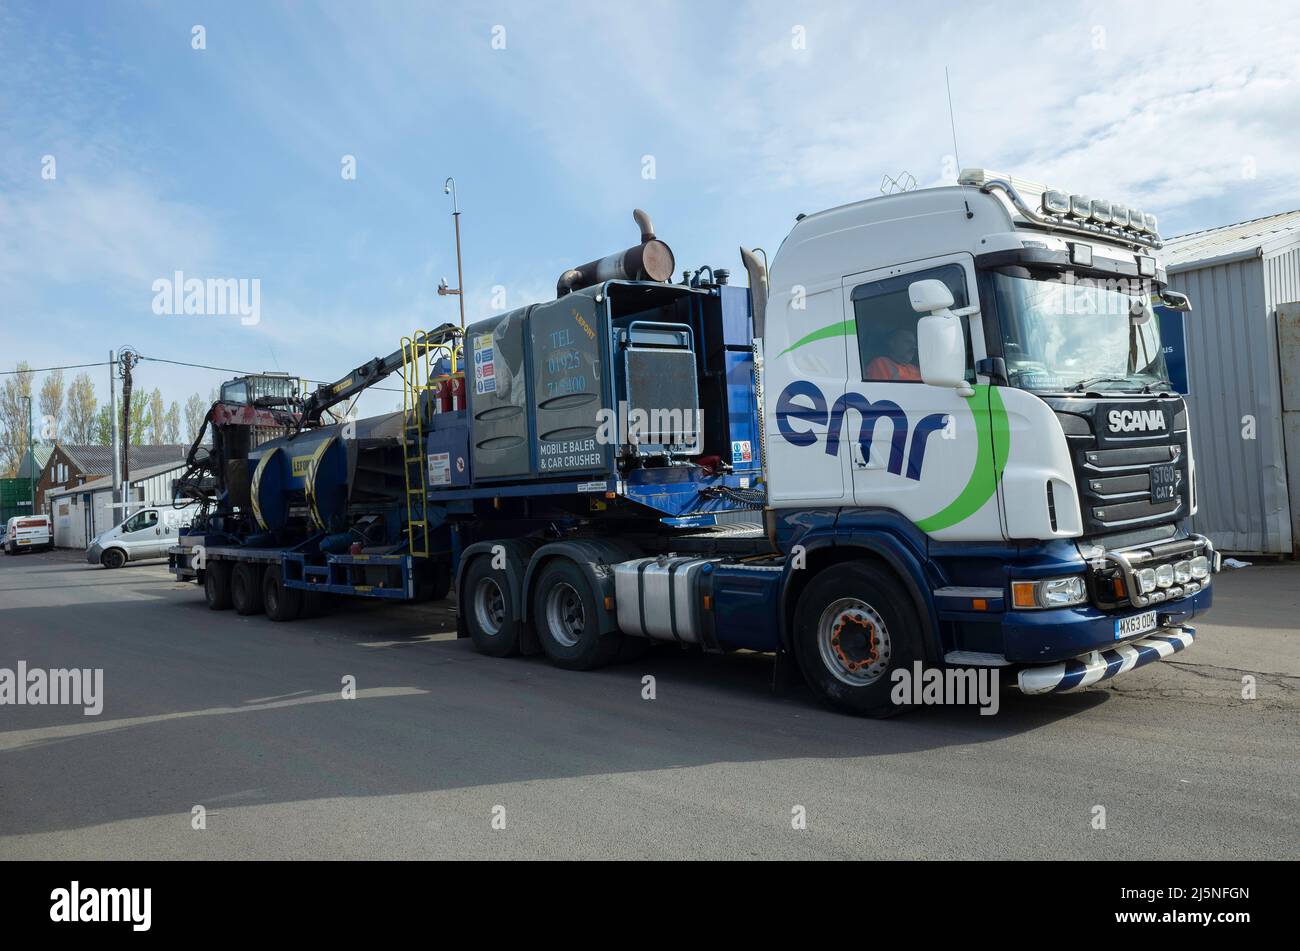 An articulated lorry owned by emr a scrap metal dealer the lorry has equipment installed for crushing cars and baling scrap metal Stock Photo